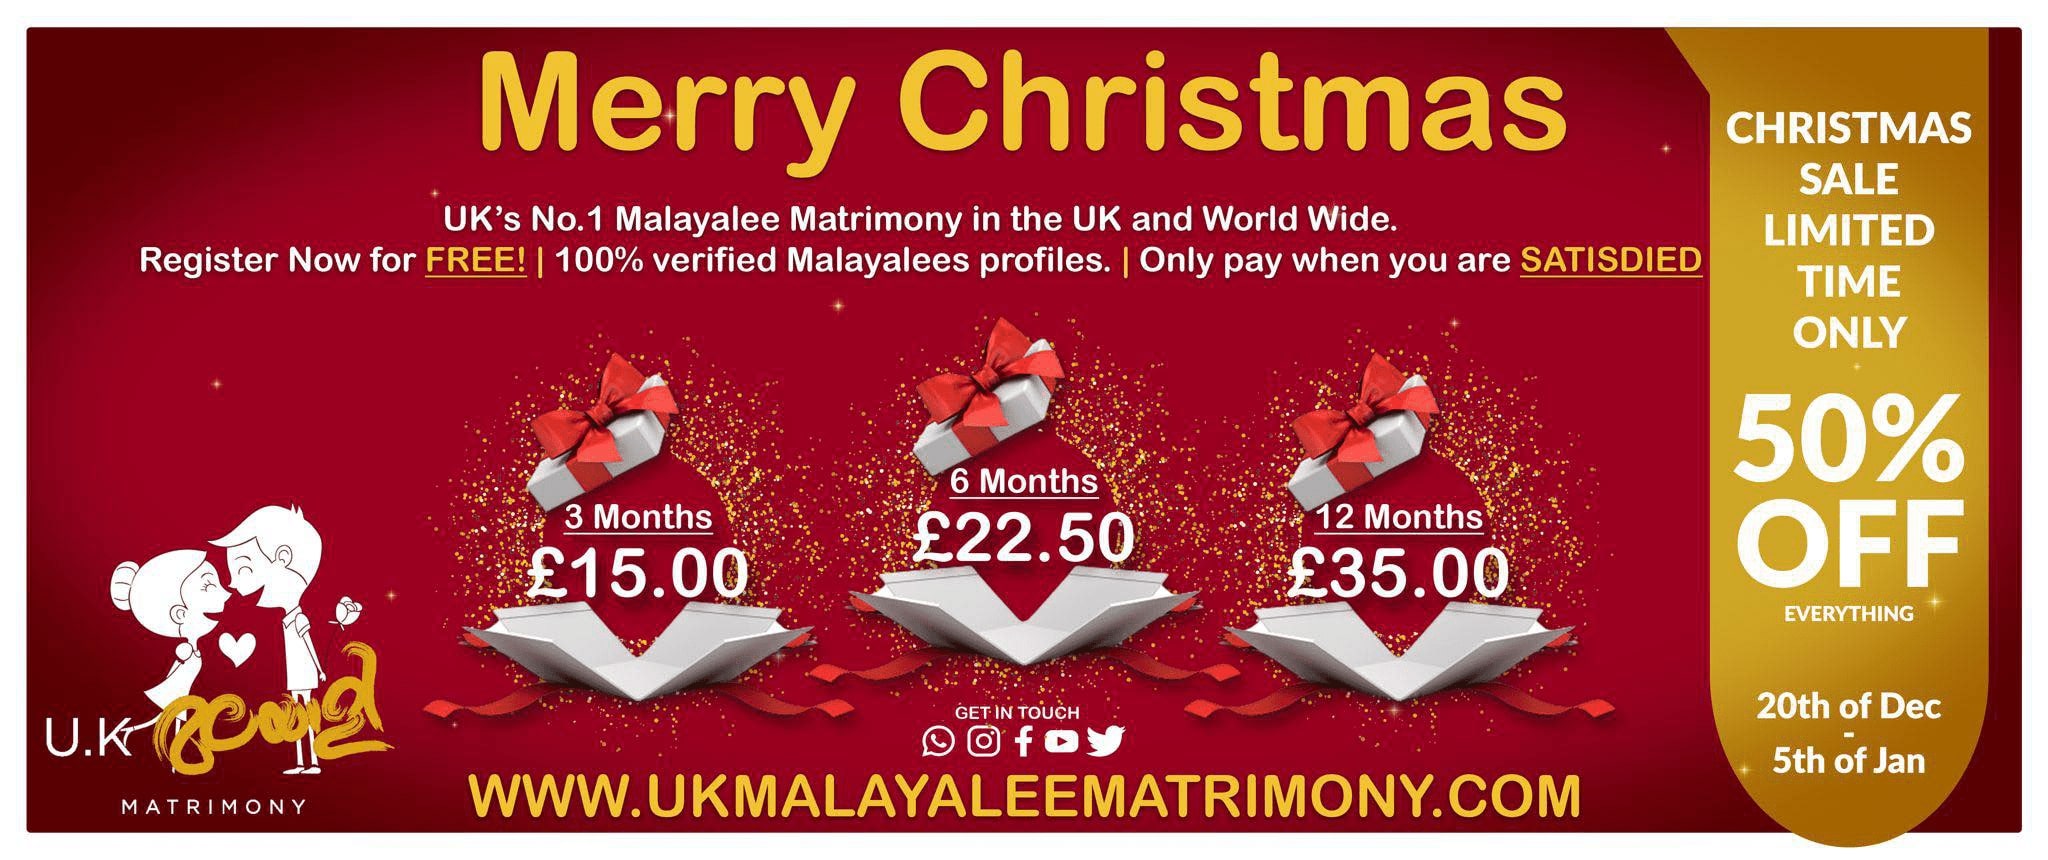 Christmas and New Year 2021 offer from UK Malayalee Matrimony